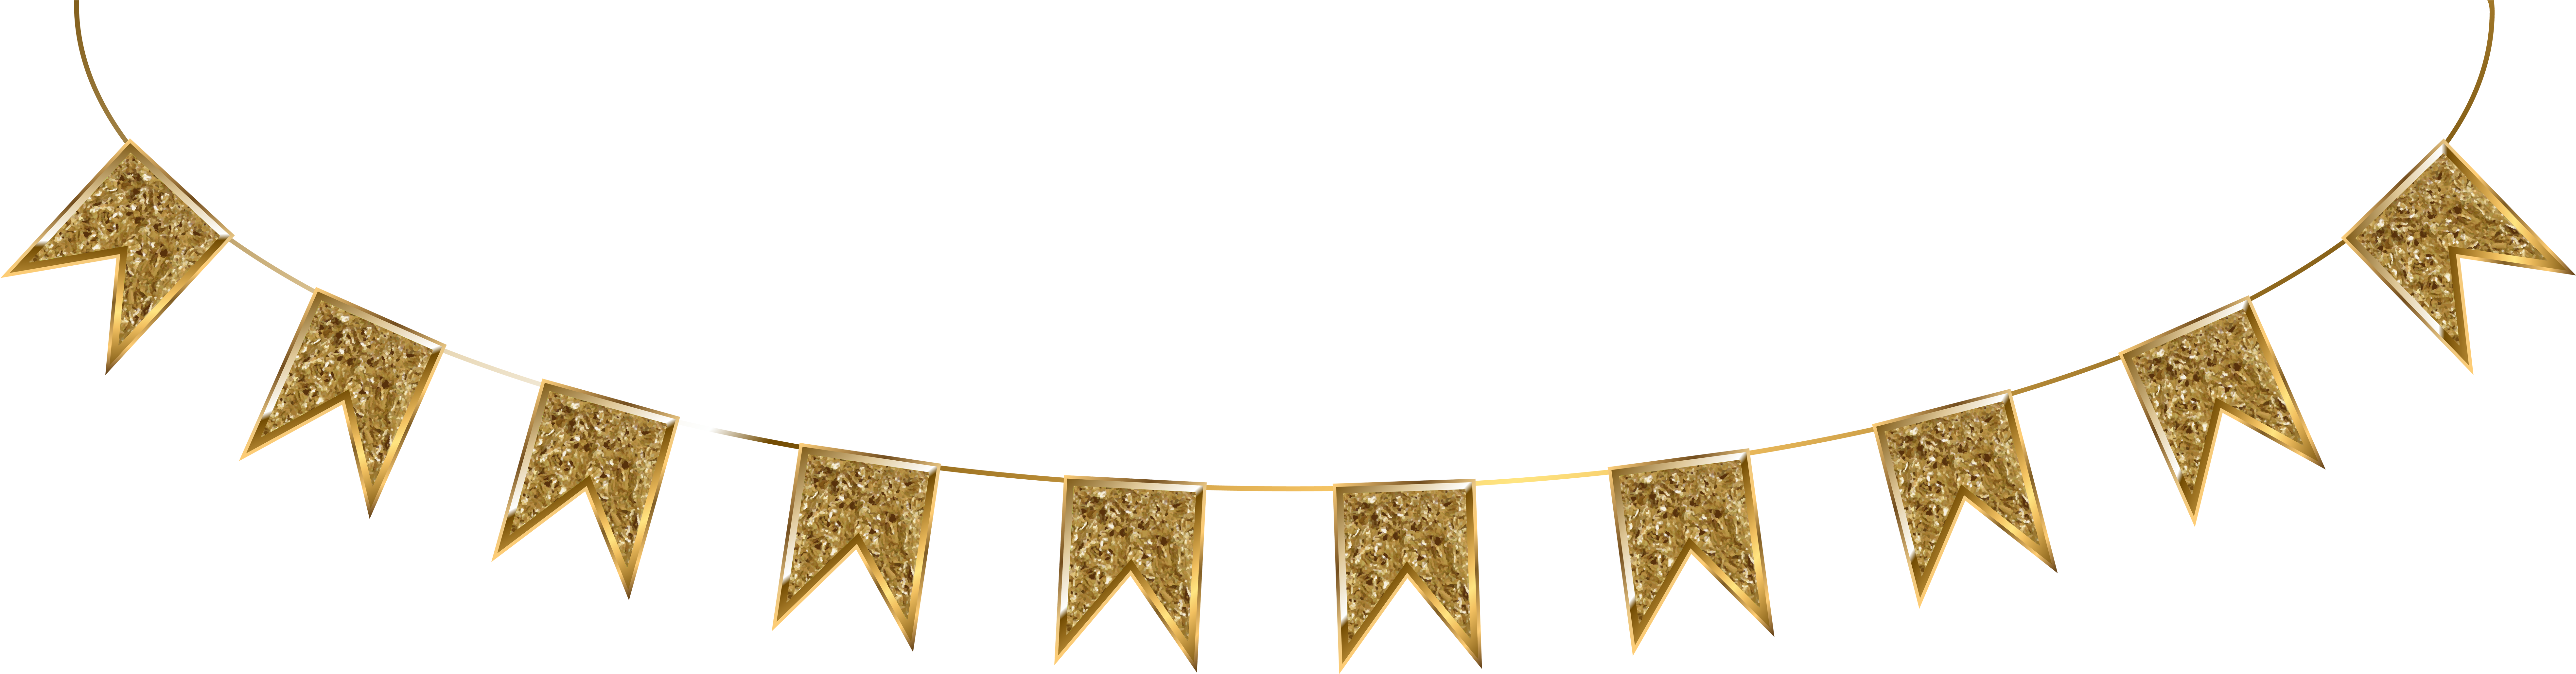 party, jpg, fire png images background